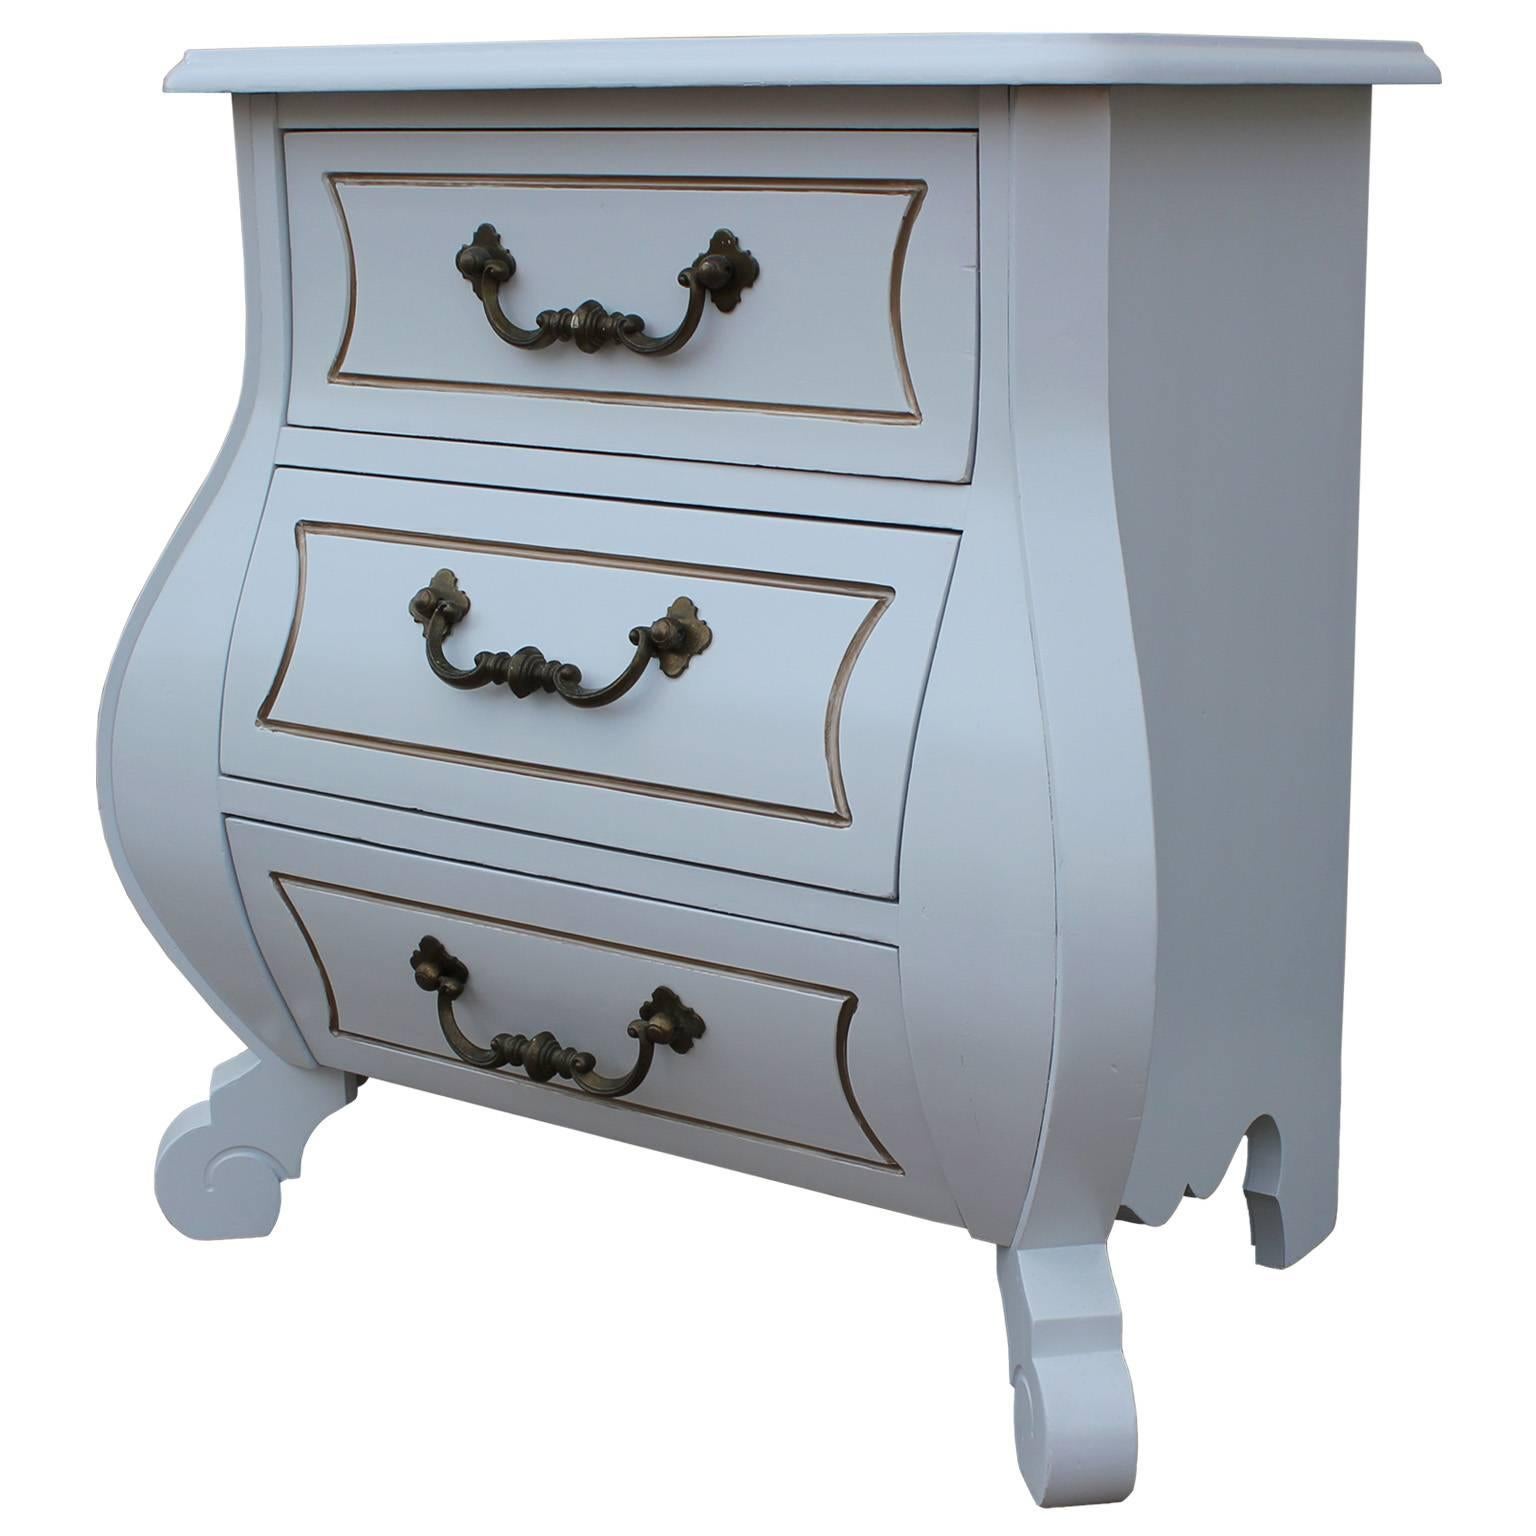 Great pair of white Bombay chests/nightstands with brass hardware. The nightstands are in nice vintage condition and would be great as bedside tables/nightstands/or chests. The nightstands were made by Kent -Coffey for the Cortina Collection. These